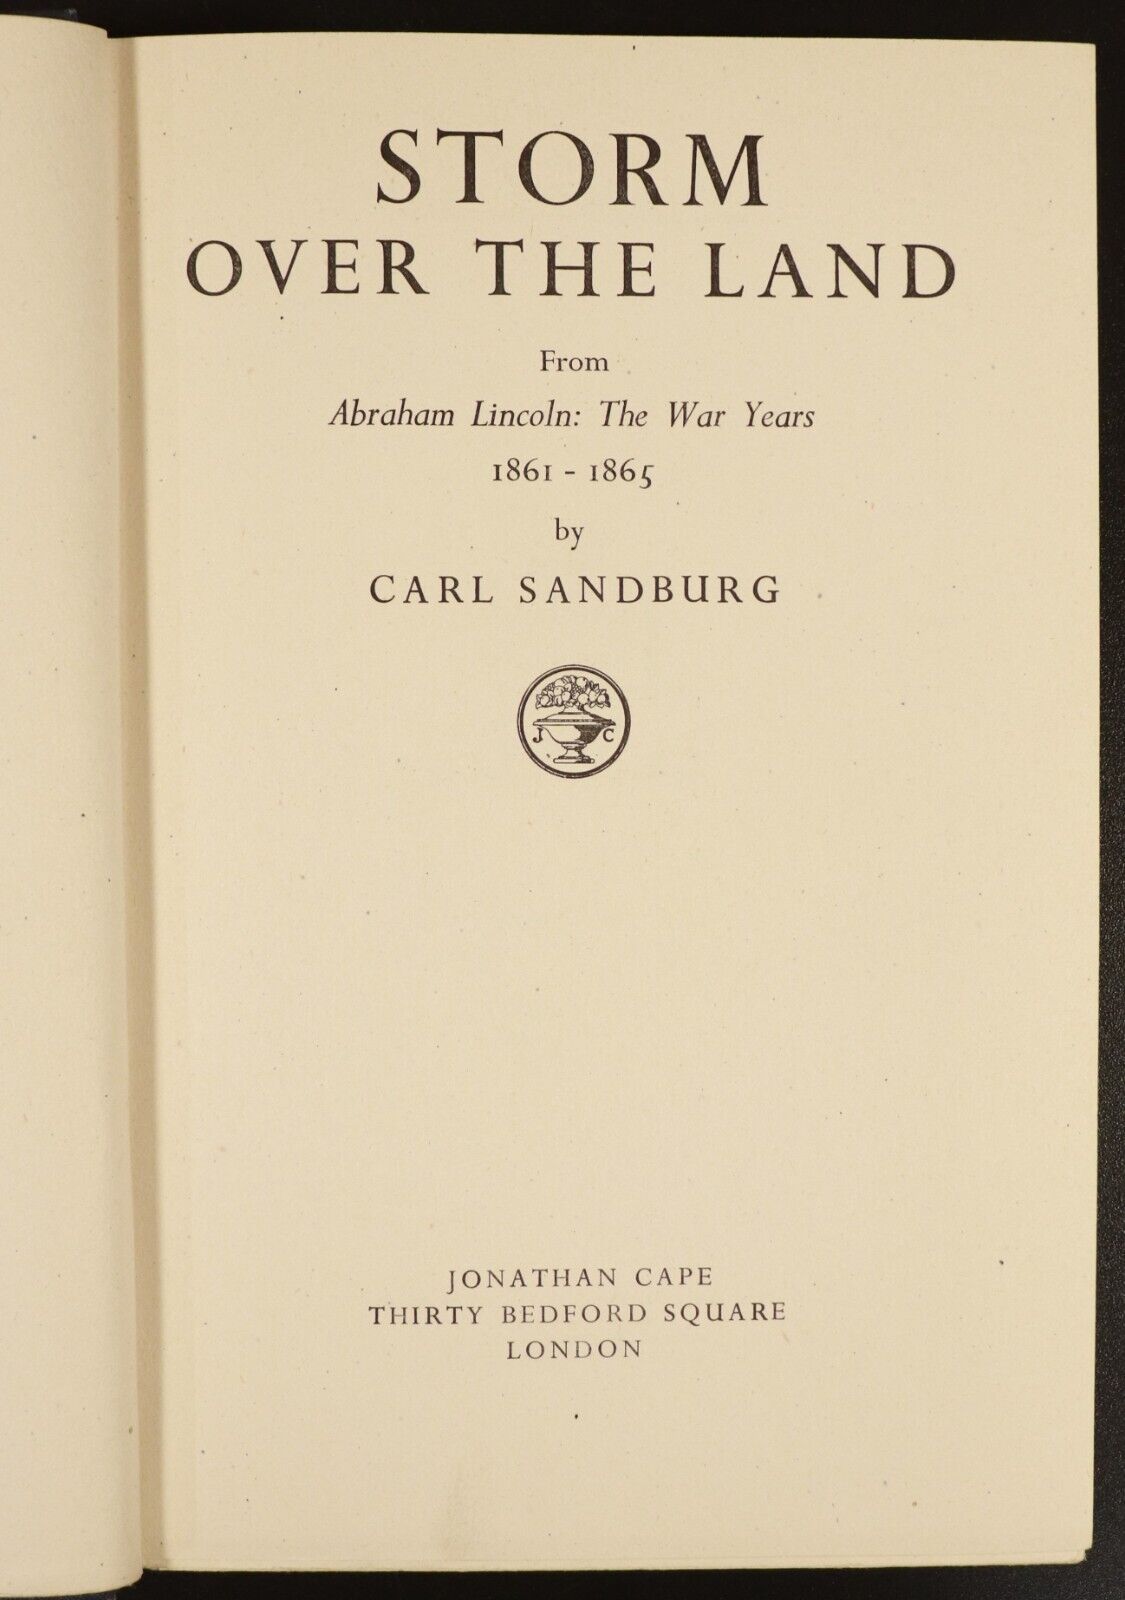 1943 Storm Over The Land by Carl Sandburg American History Book Abraham Lincoln